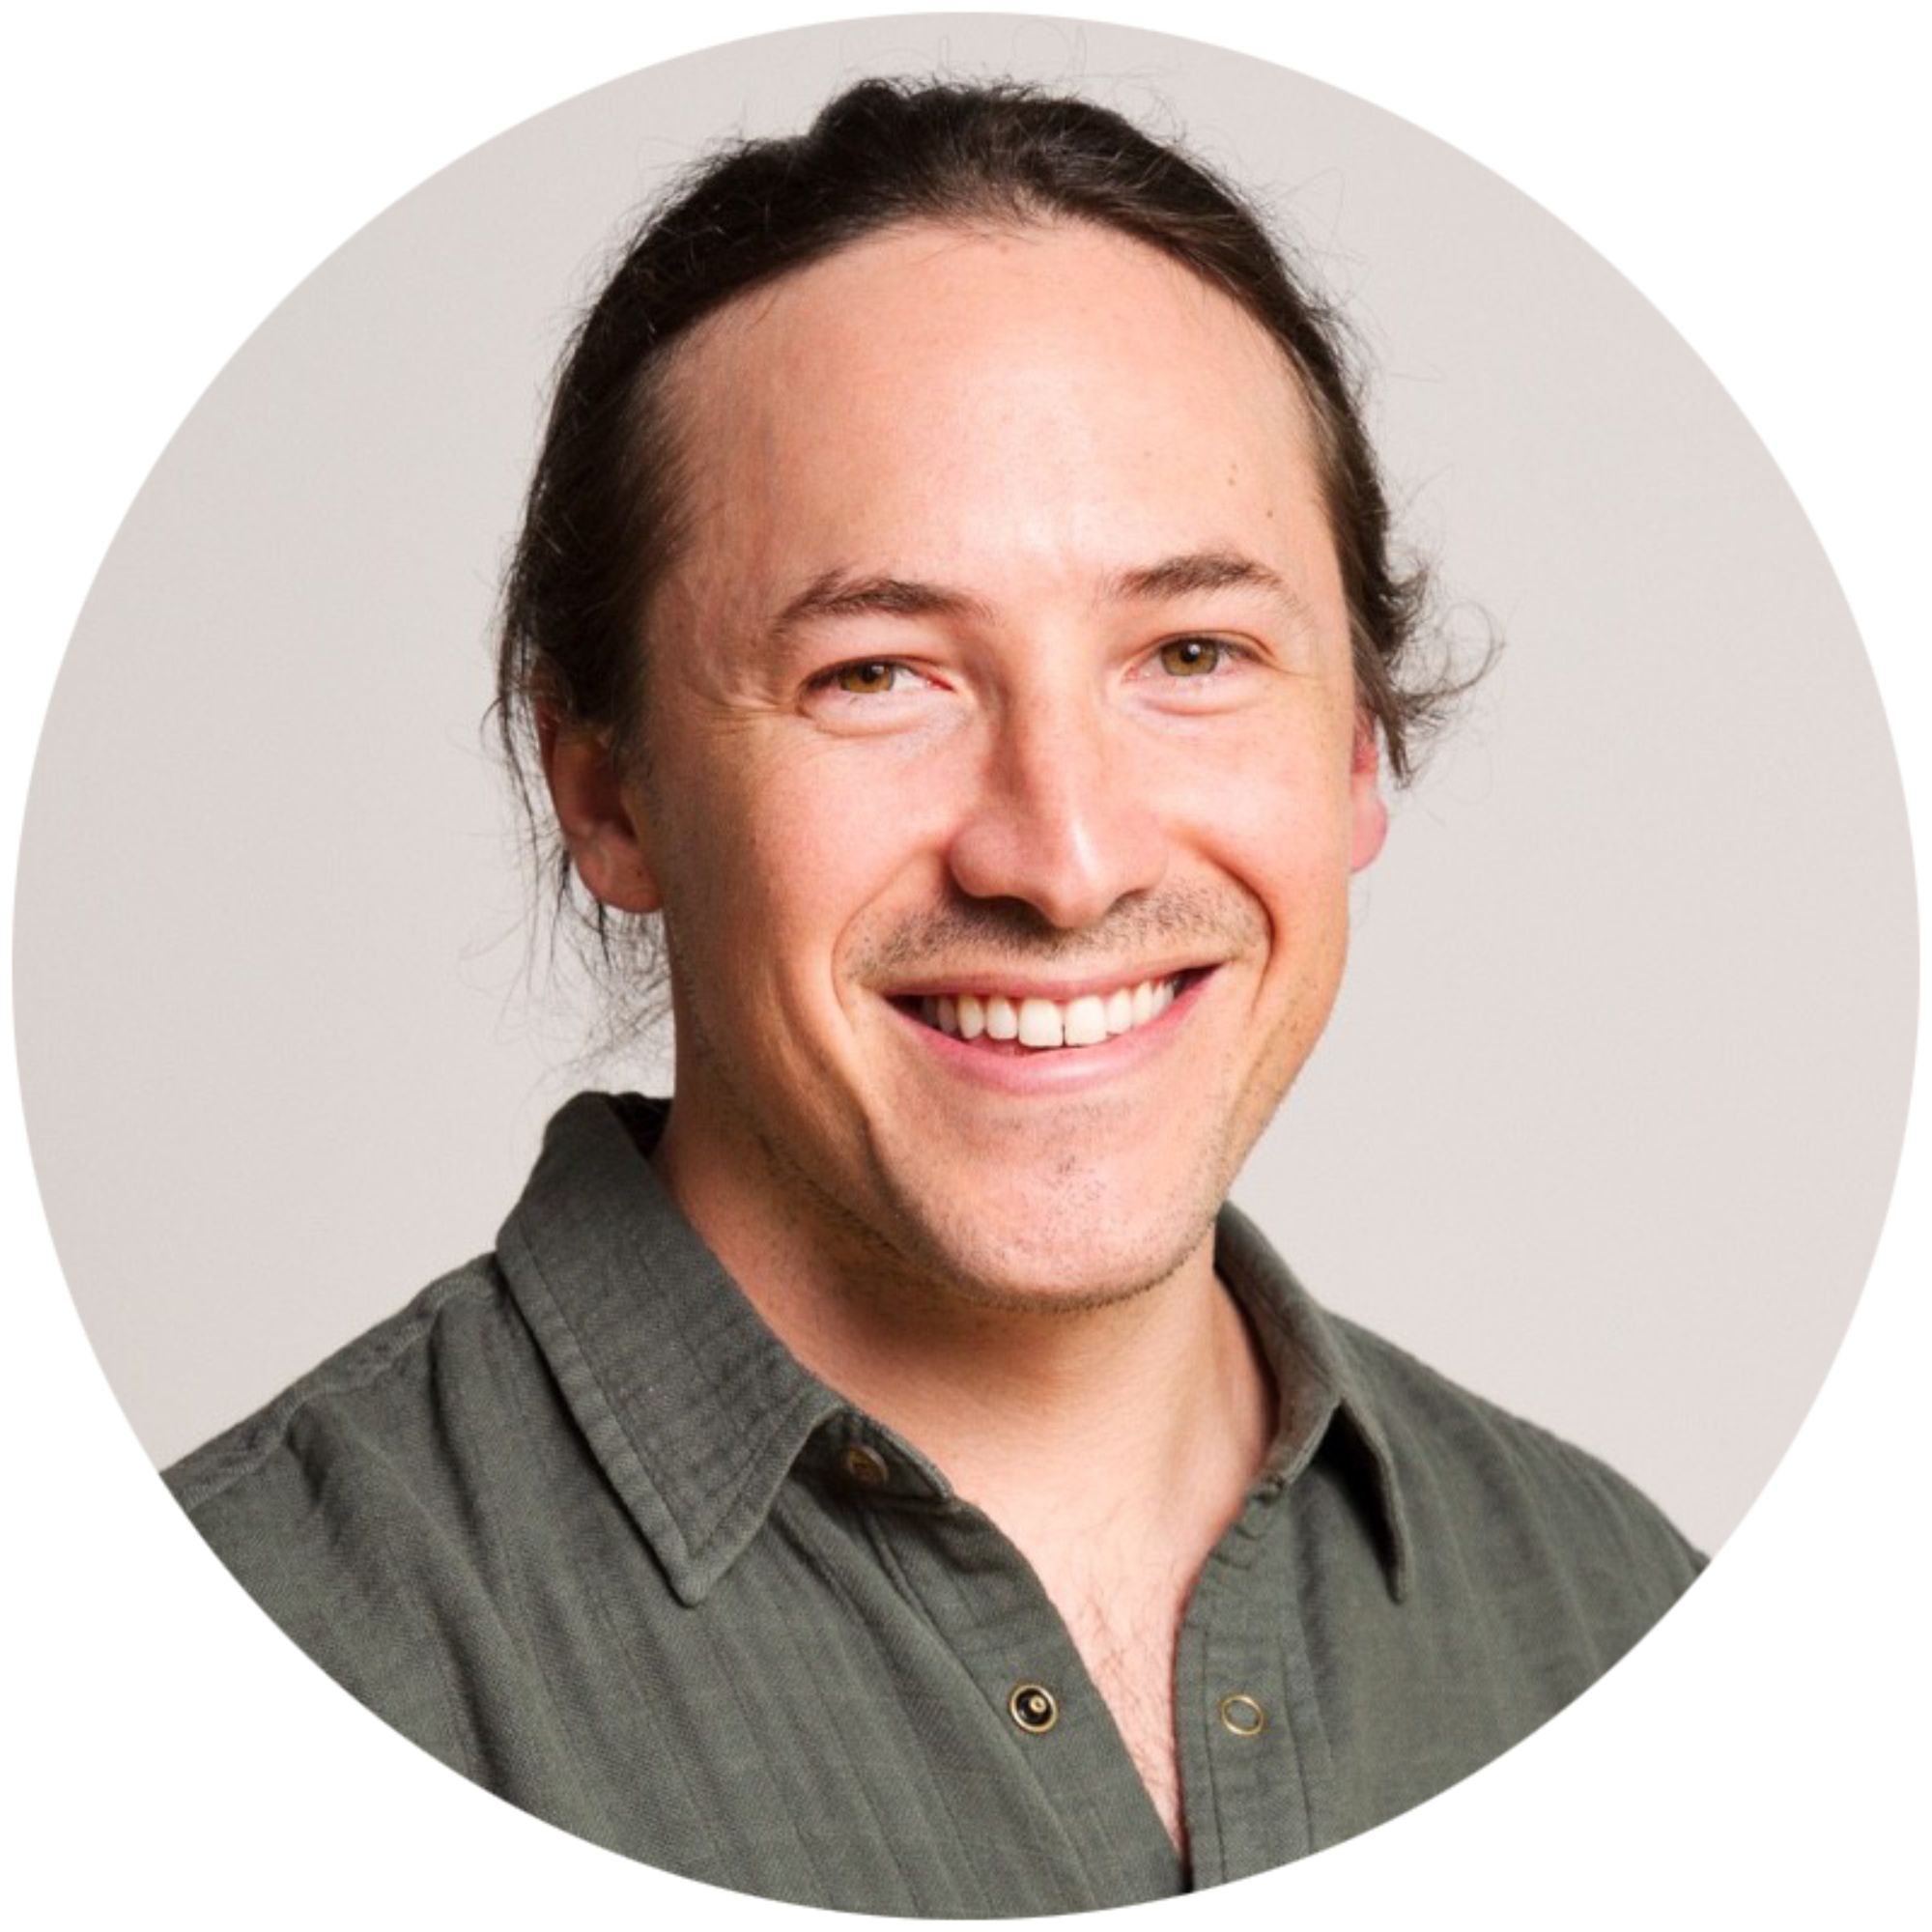 A headshot of Jeff Kahn, CEO of Rise Science